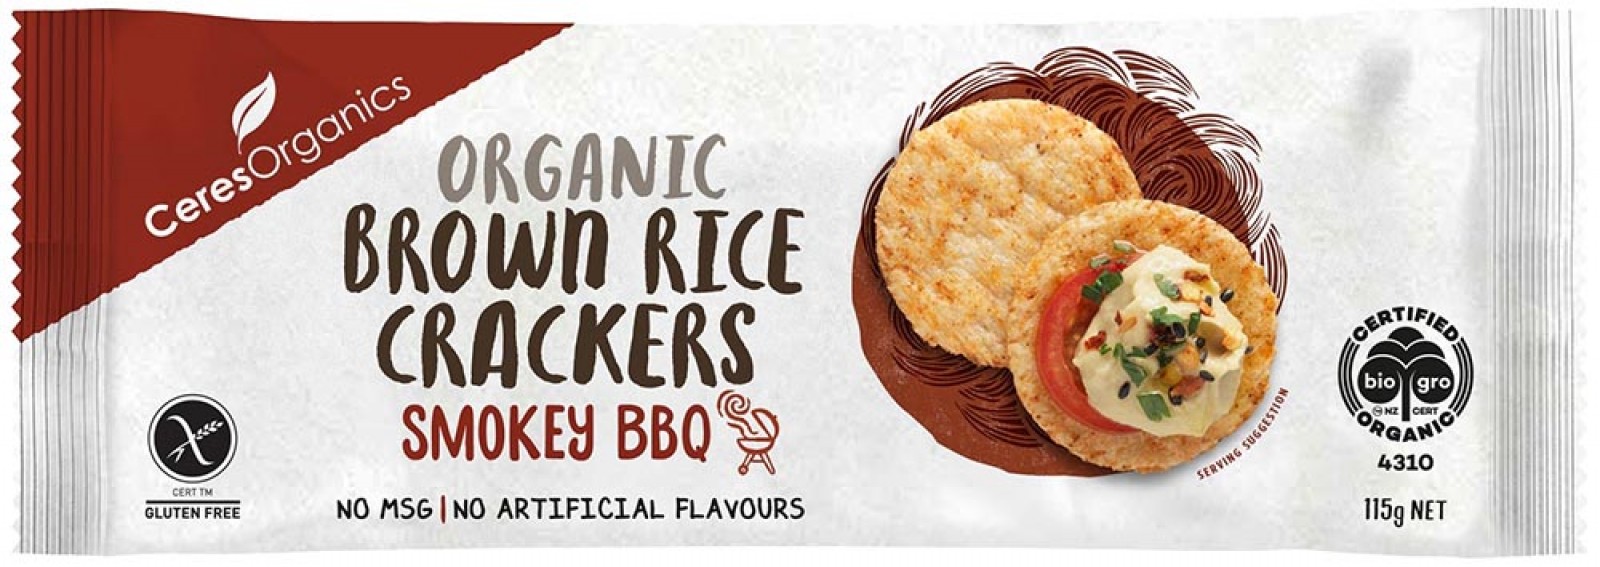 Brown Rice Crackers BBQ